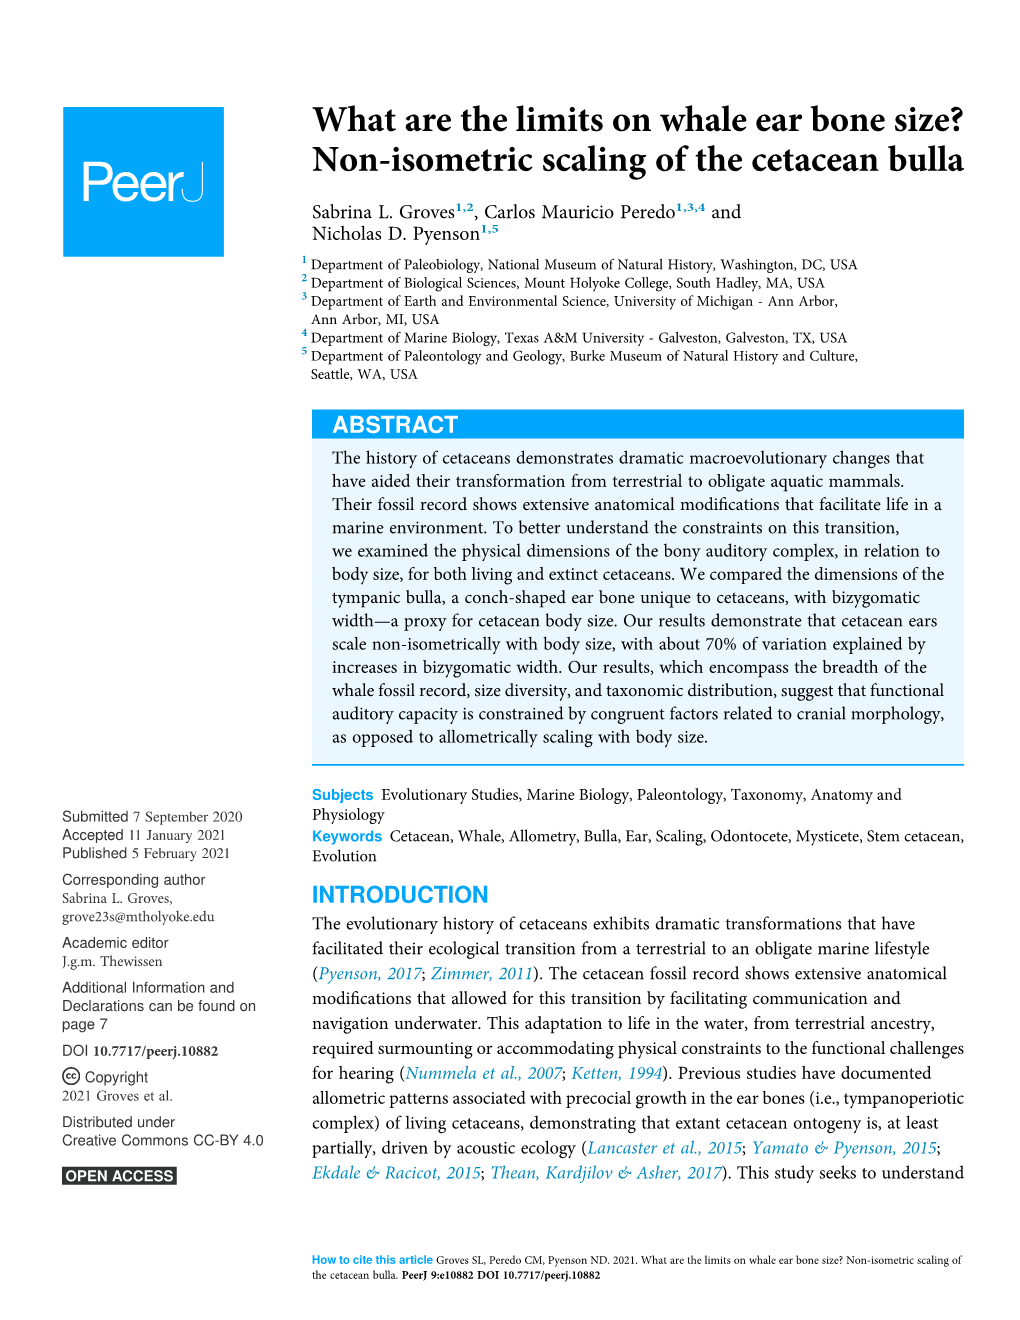 What Are the Limits on Whale Ear Bone Size? Non-Isometric Scaling of the Cetacean Bulla